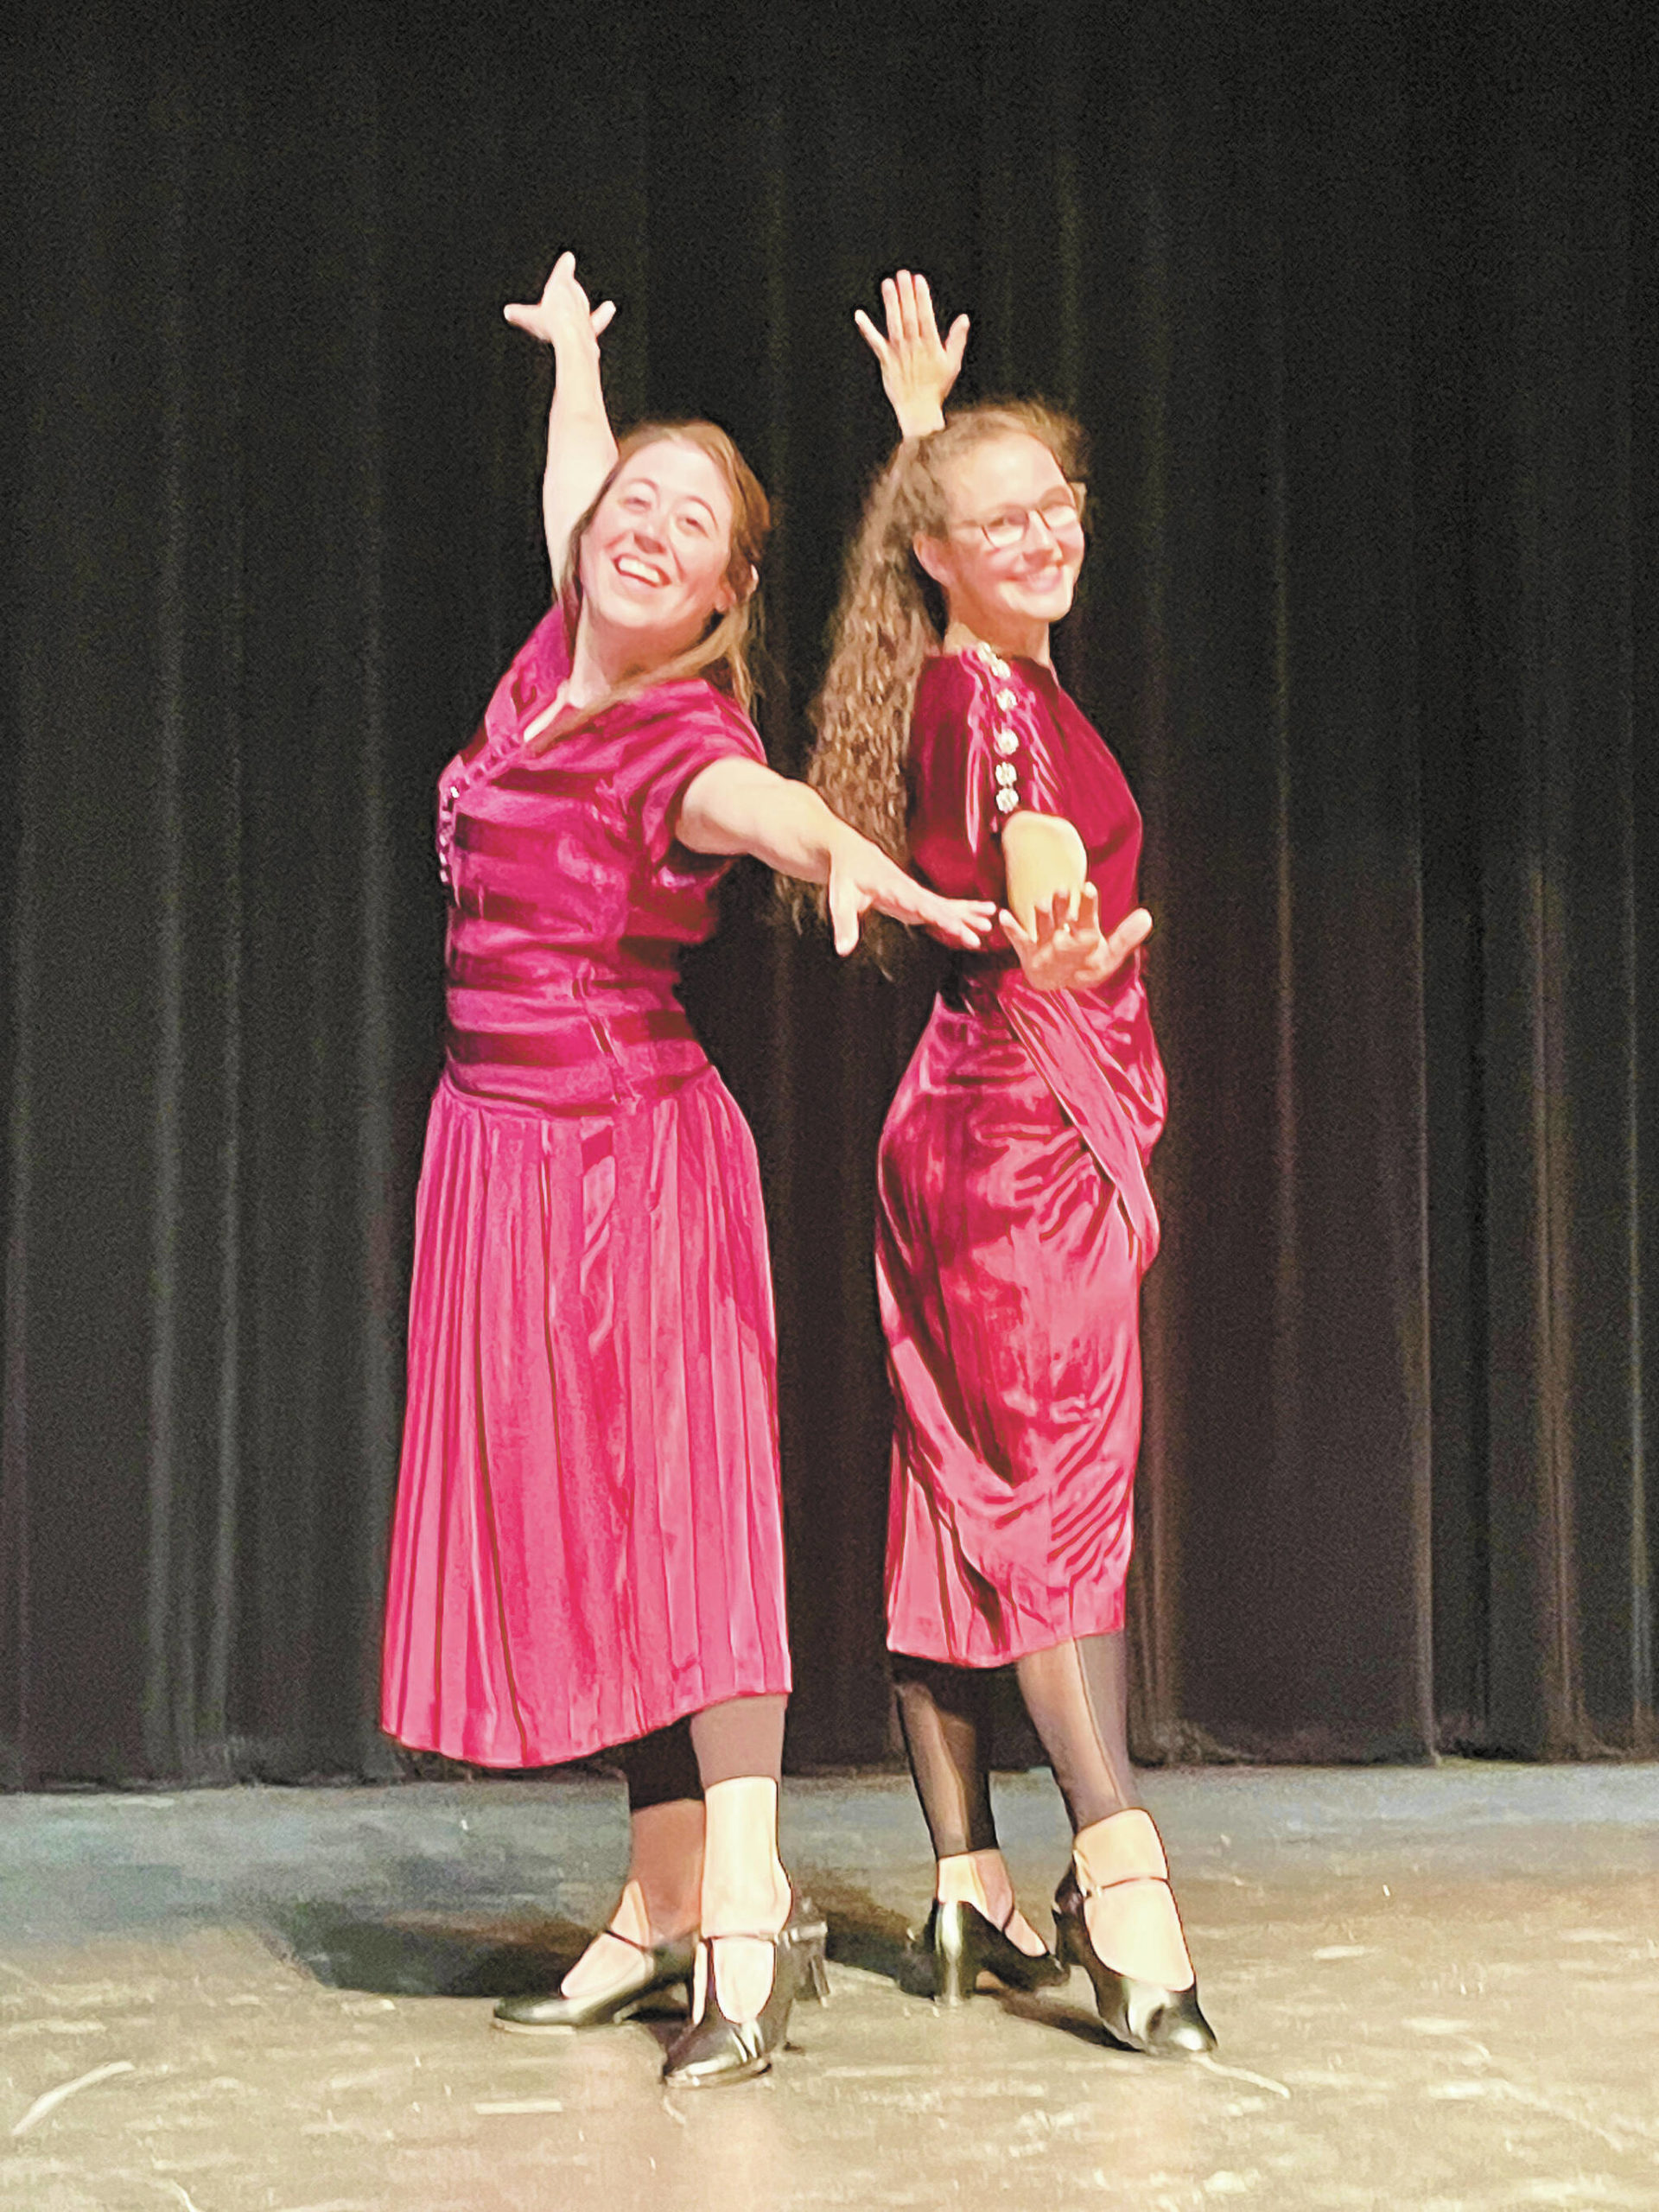 Photo provided
Maura Jones, left, and Ireland Styvar, right, rehearse for “Nice Moves,” one of the Alaska World Arts Festival events for the festival starting Friday.